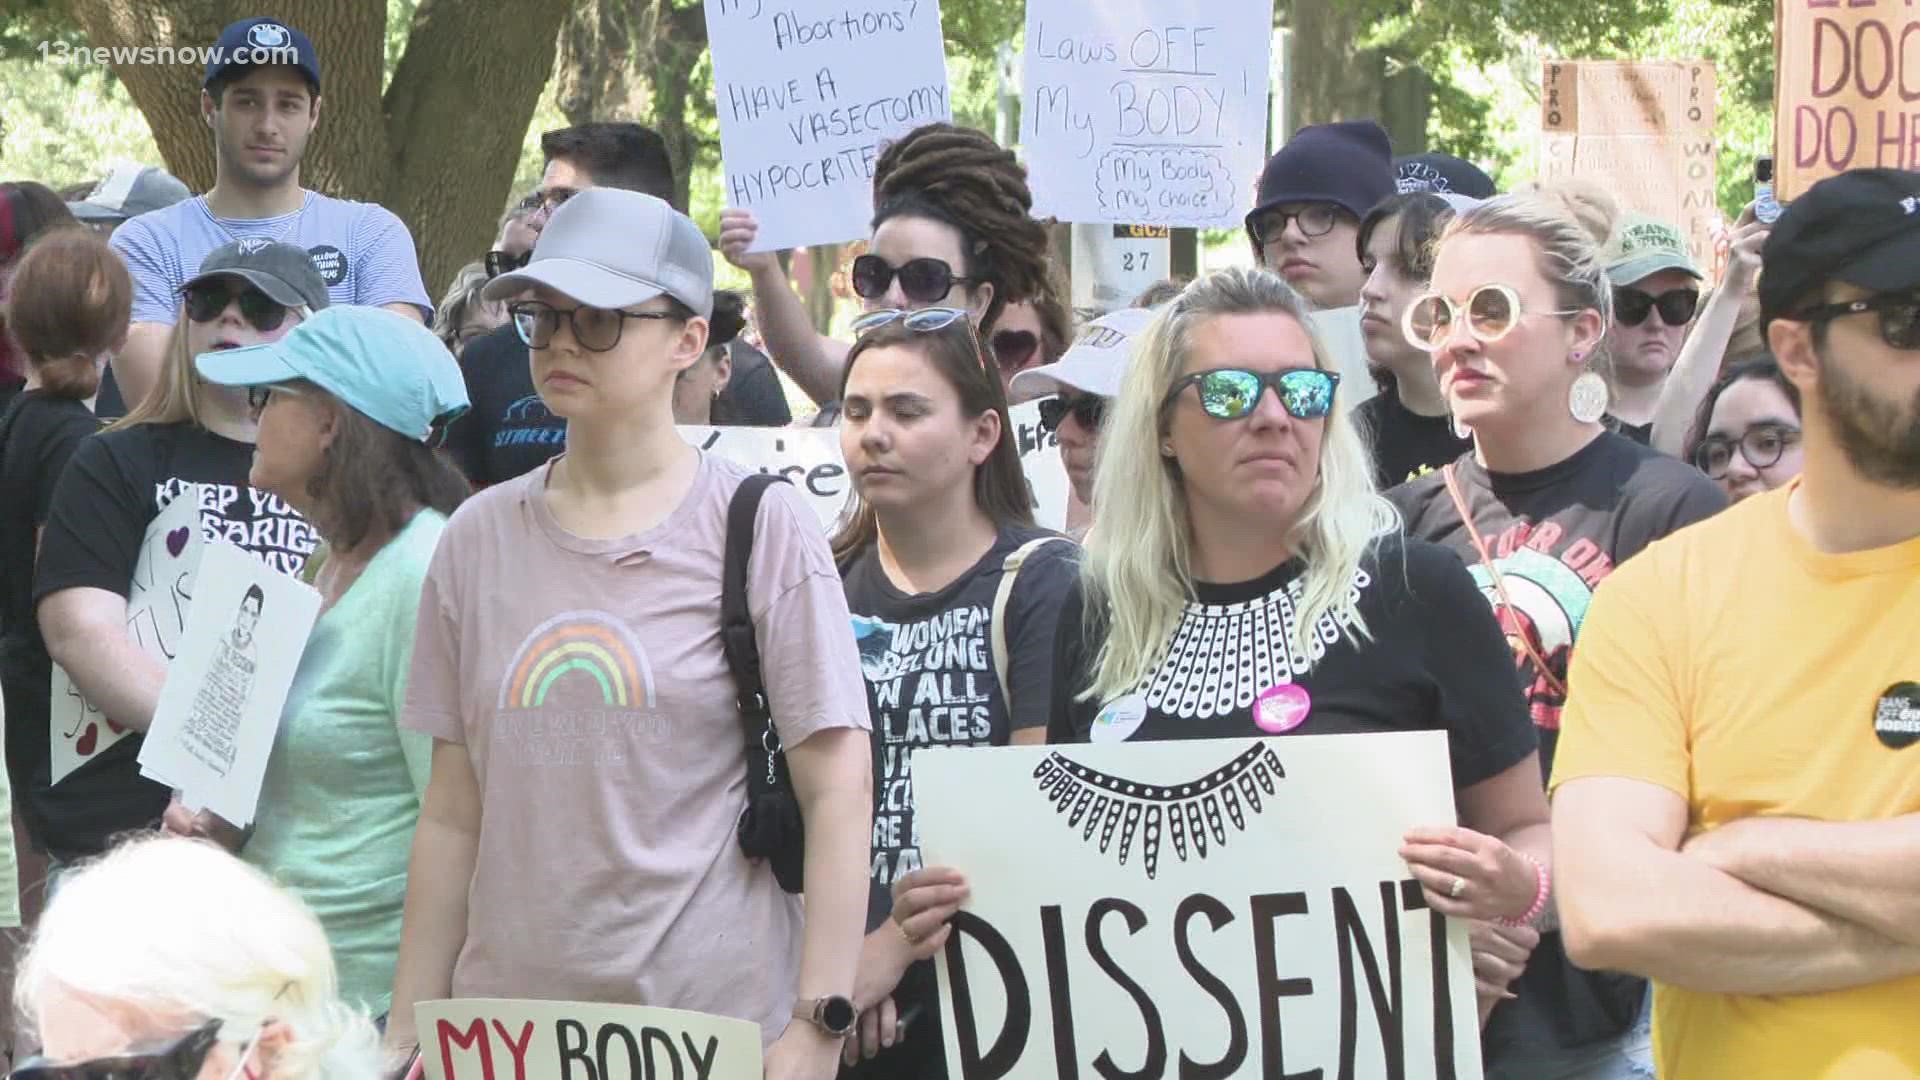 Hundreds of people protested the ruling in Norfolk, shared their abortion stories, and called on the government to stay out of people’s personal health decisions.